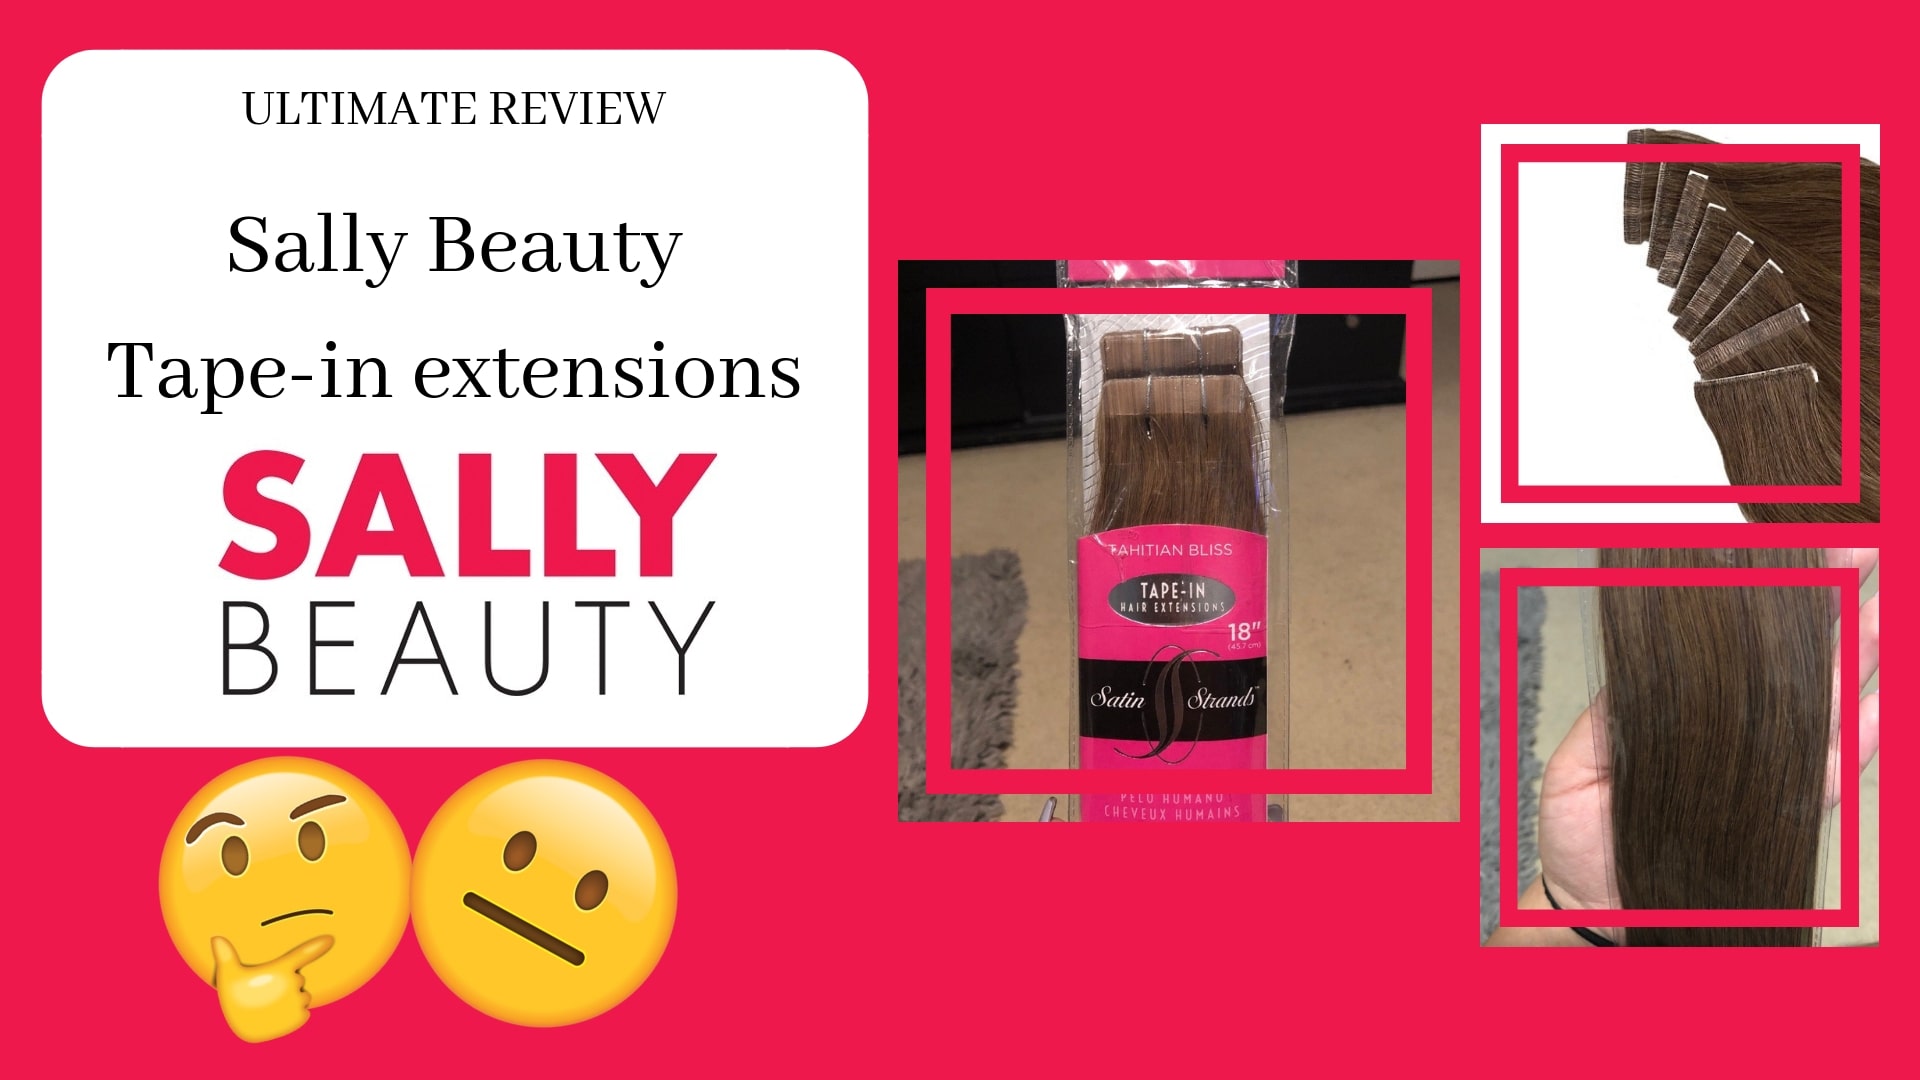 Sally Beauty's tape-in extensions ultimate review (pros and cons)